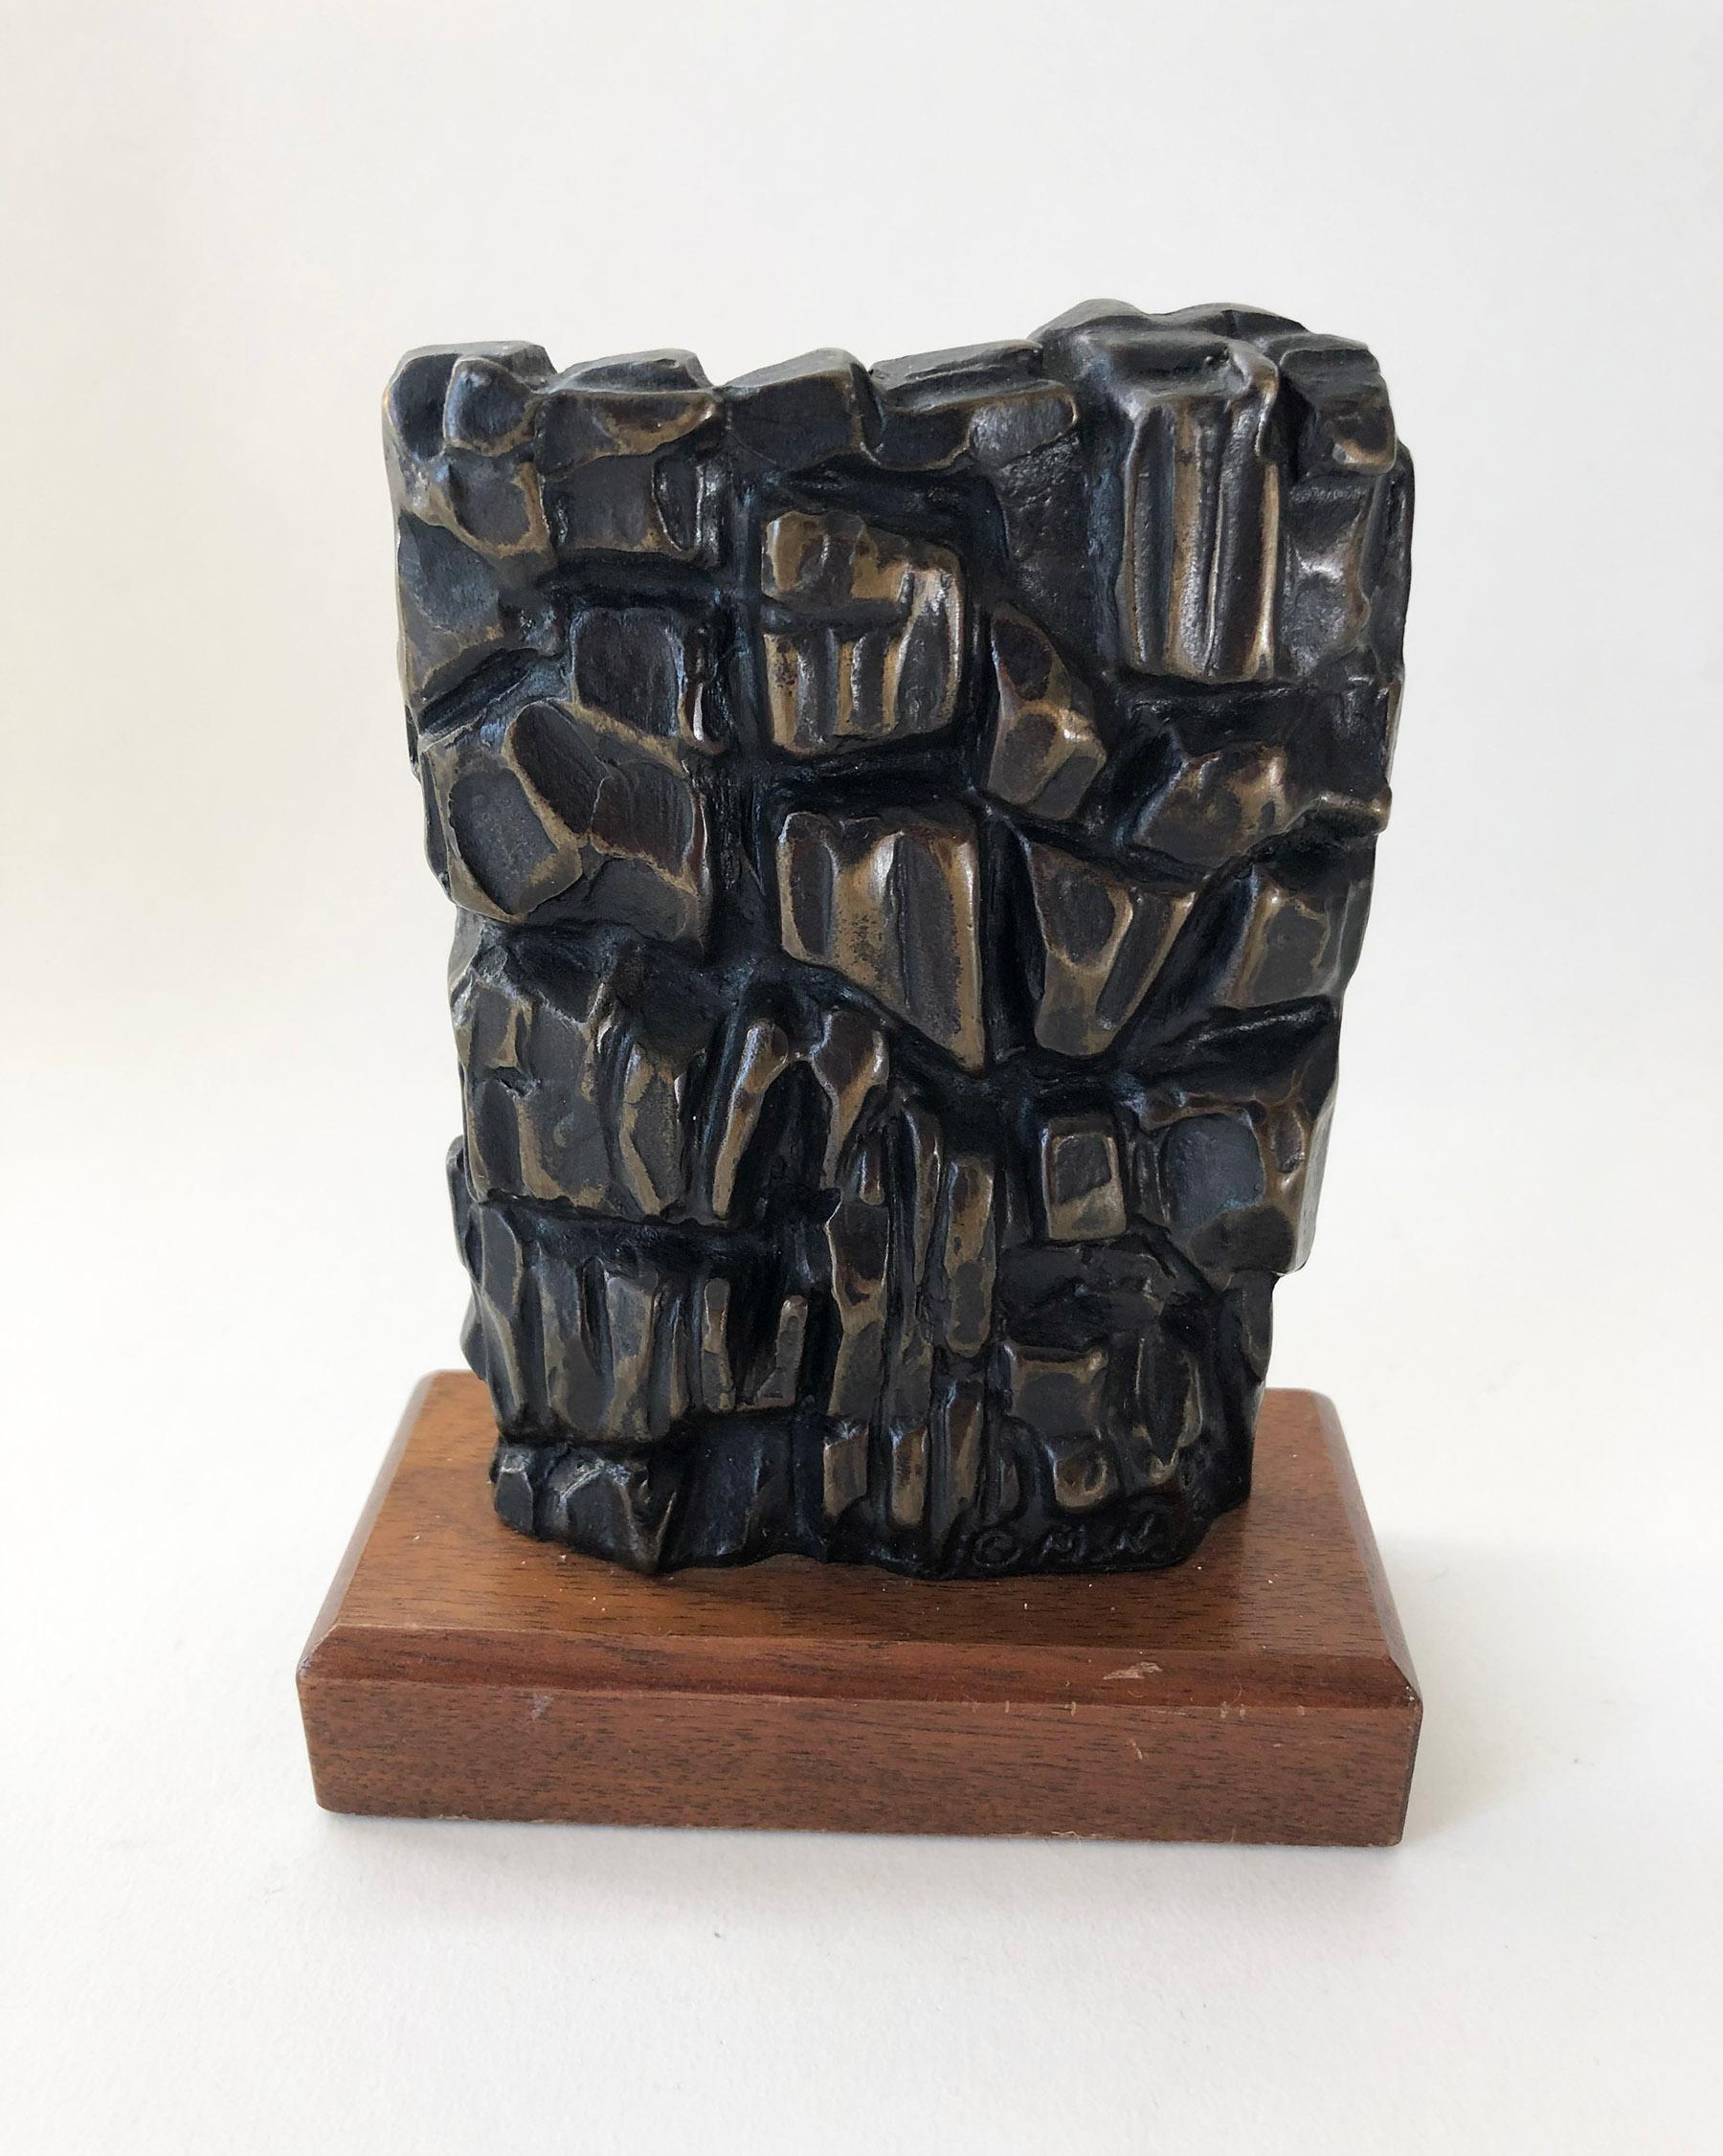 Abstract modernist heavy bronze signed sculpture on wood base signed MM, artist unknown. Sculpture measures 5